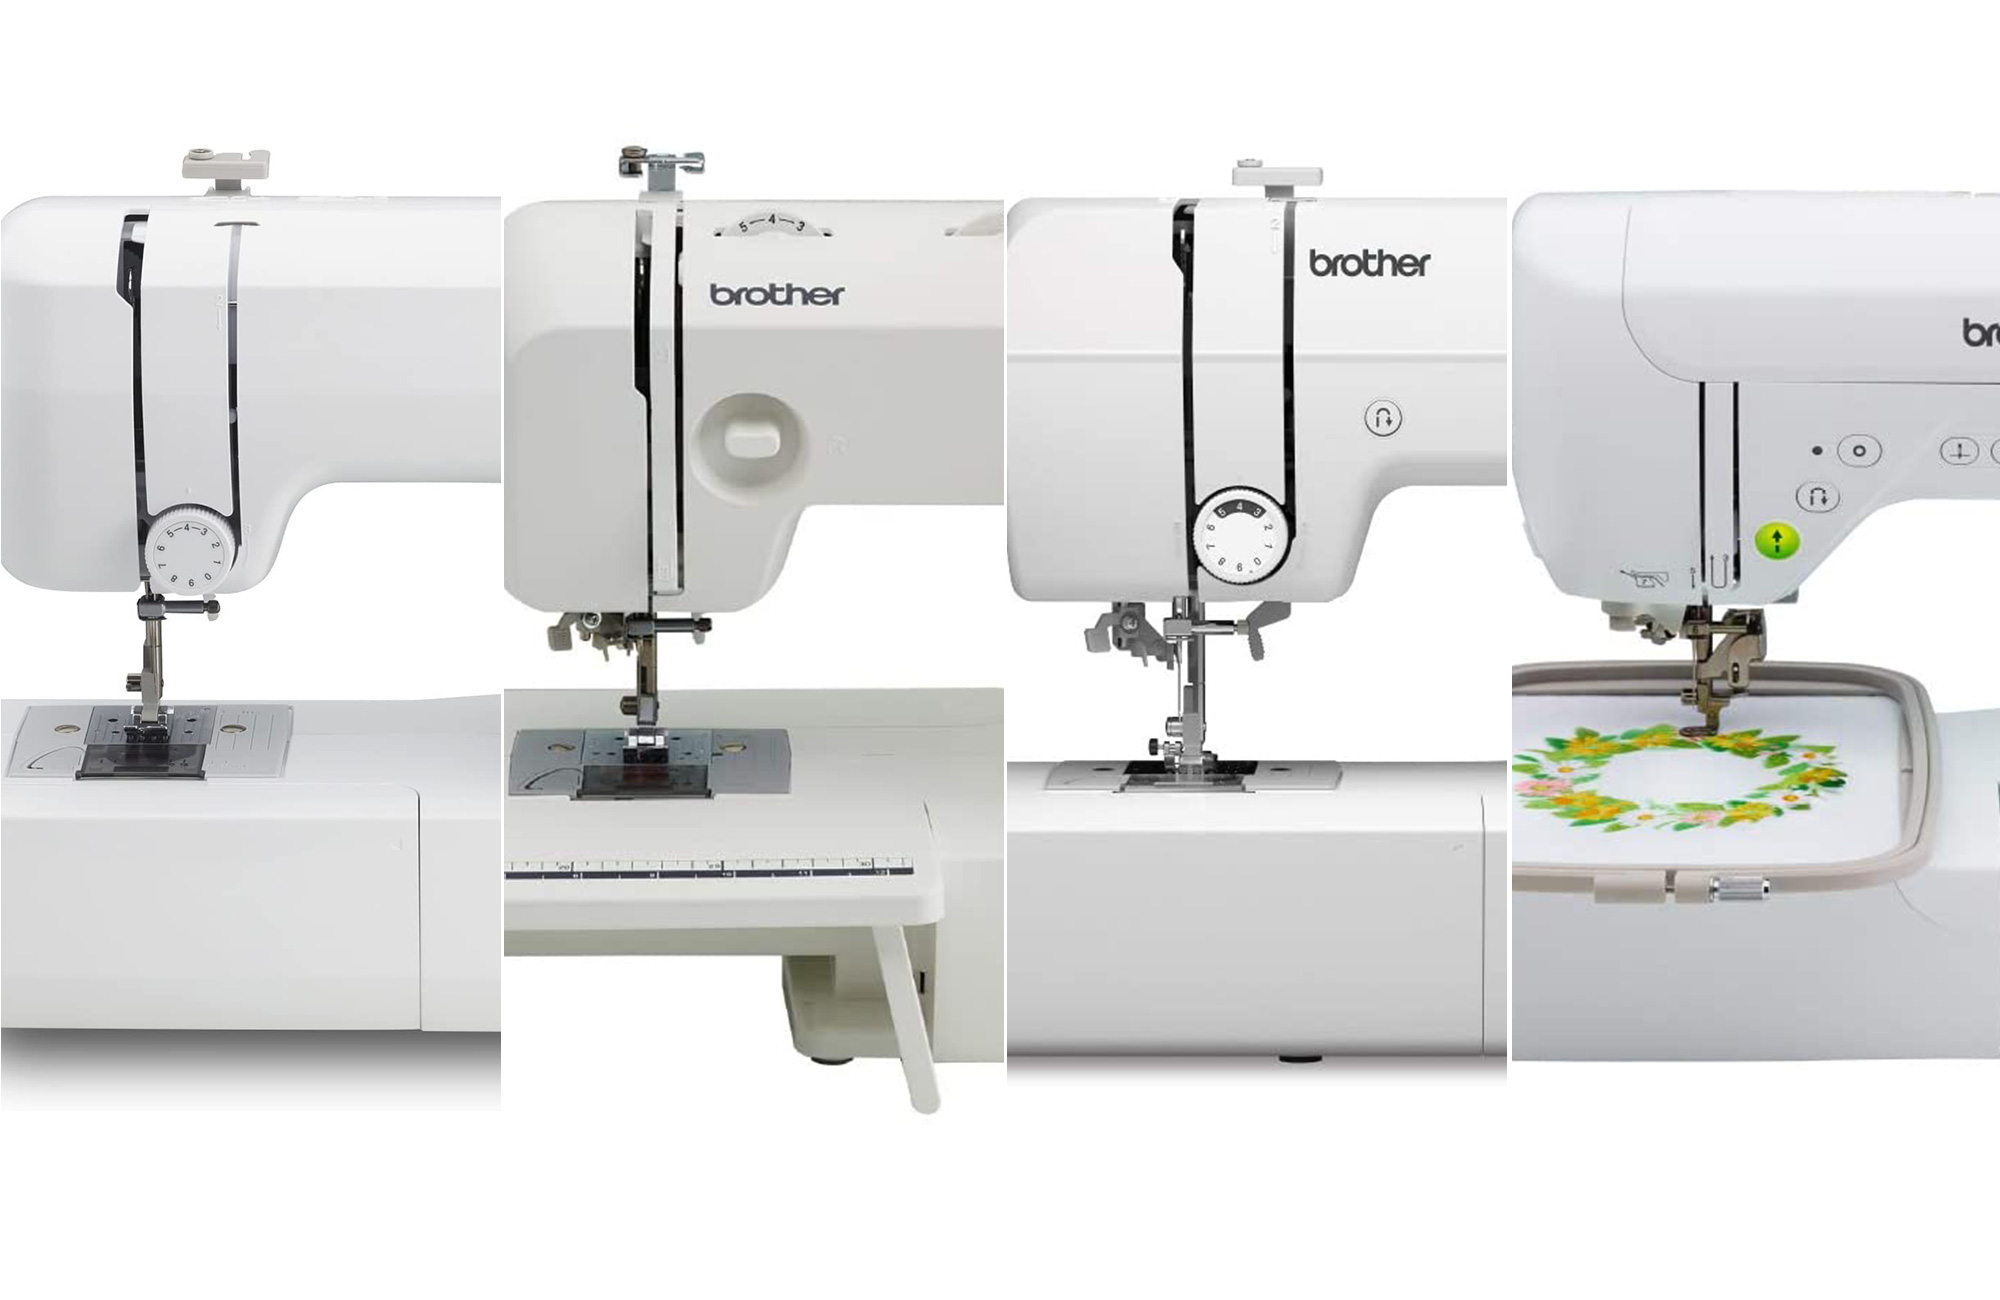 8 of the best sewing machines 2022